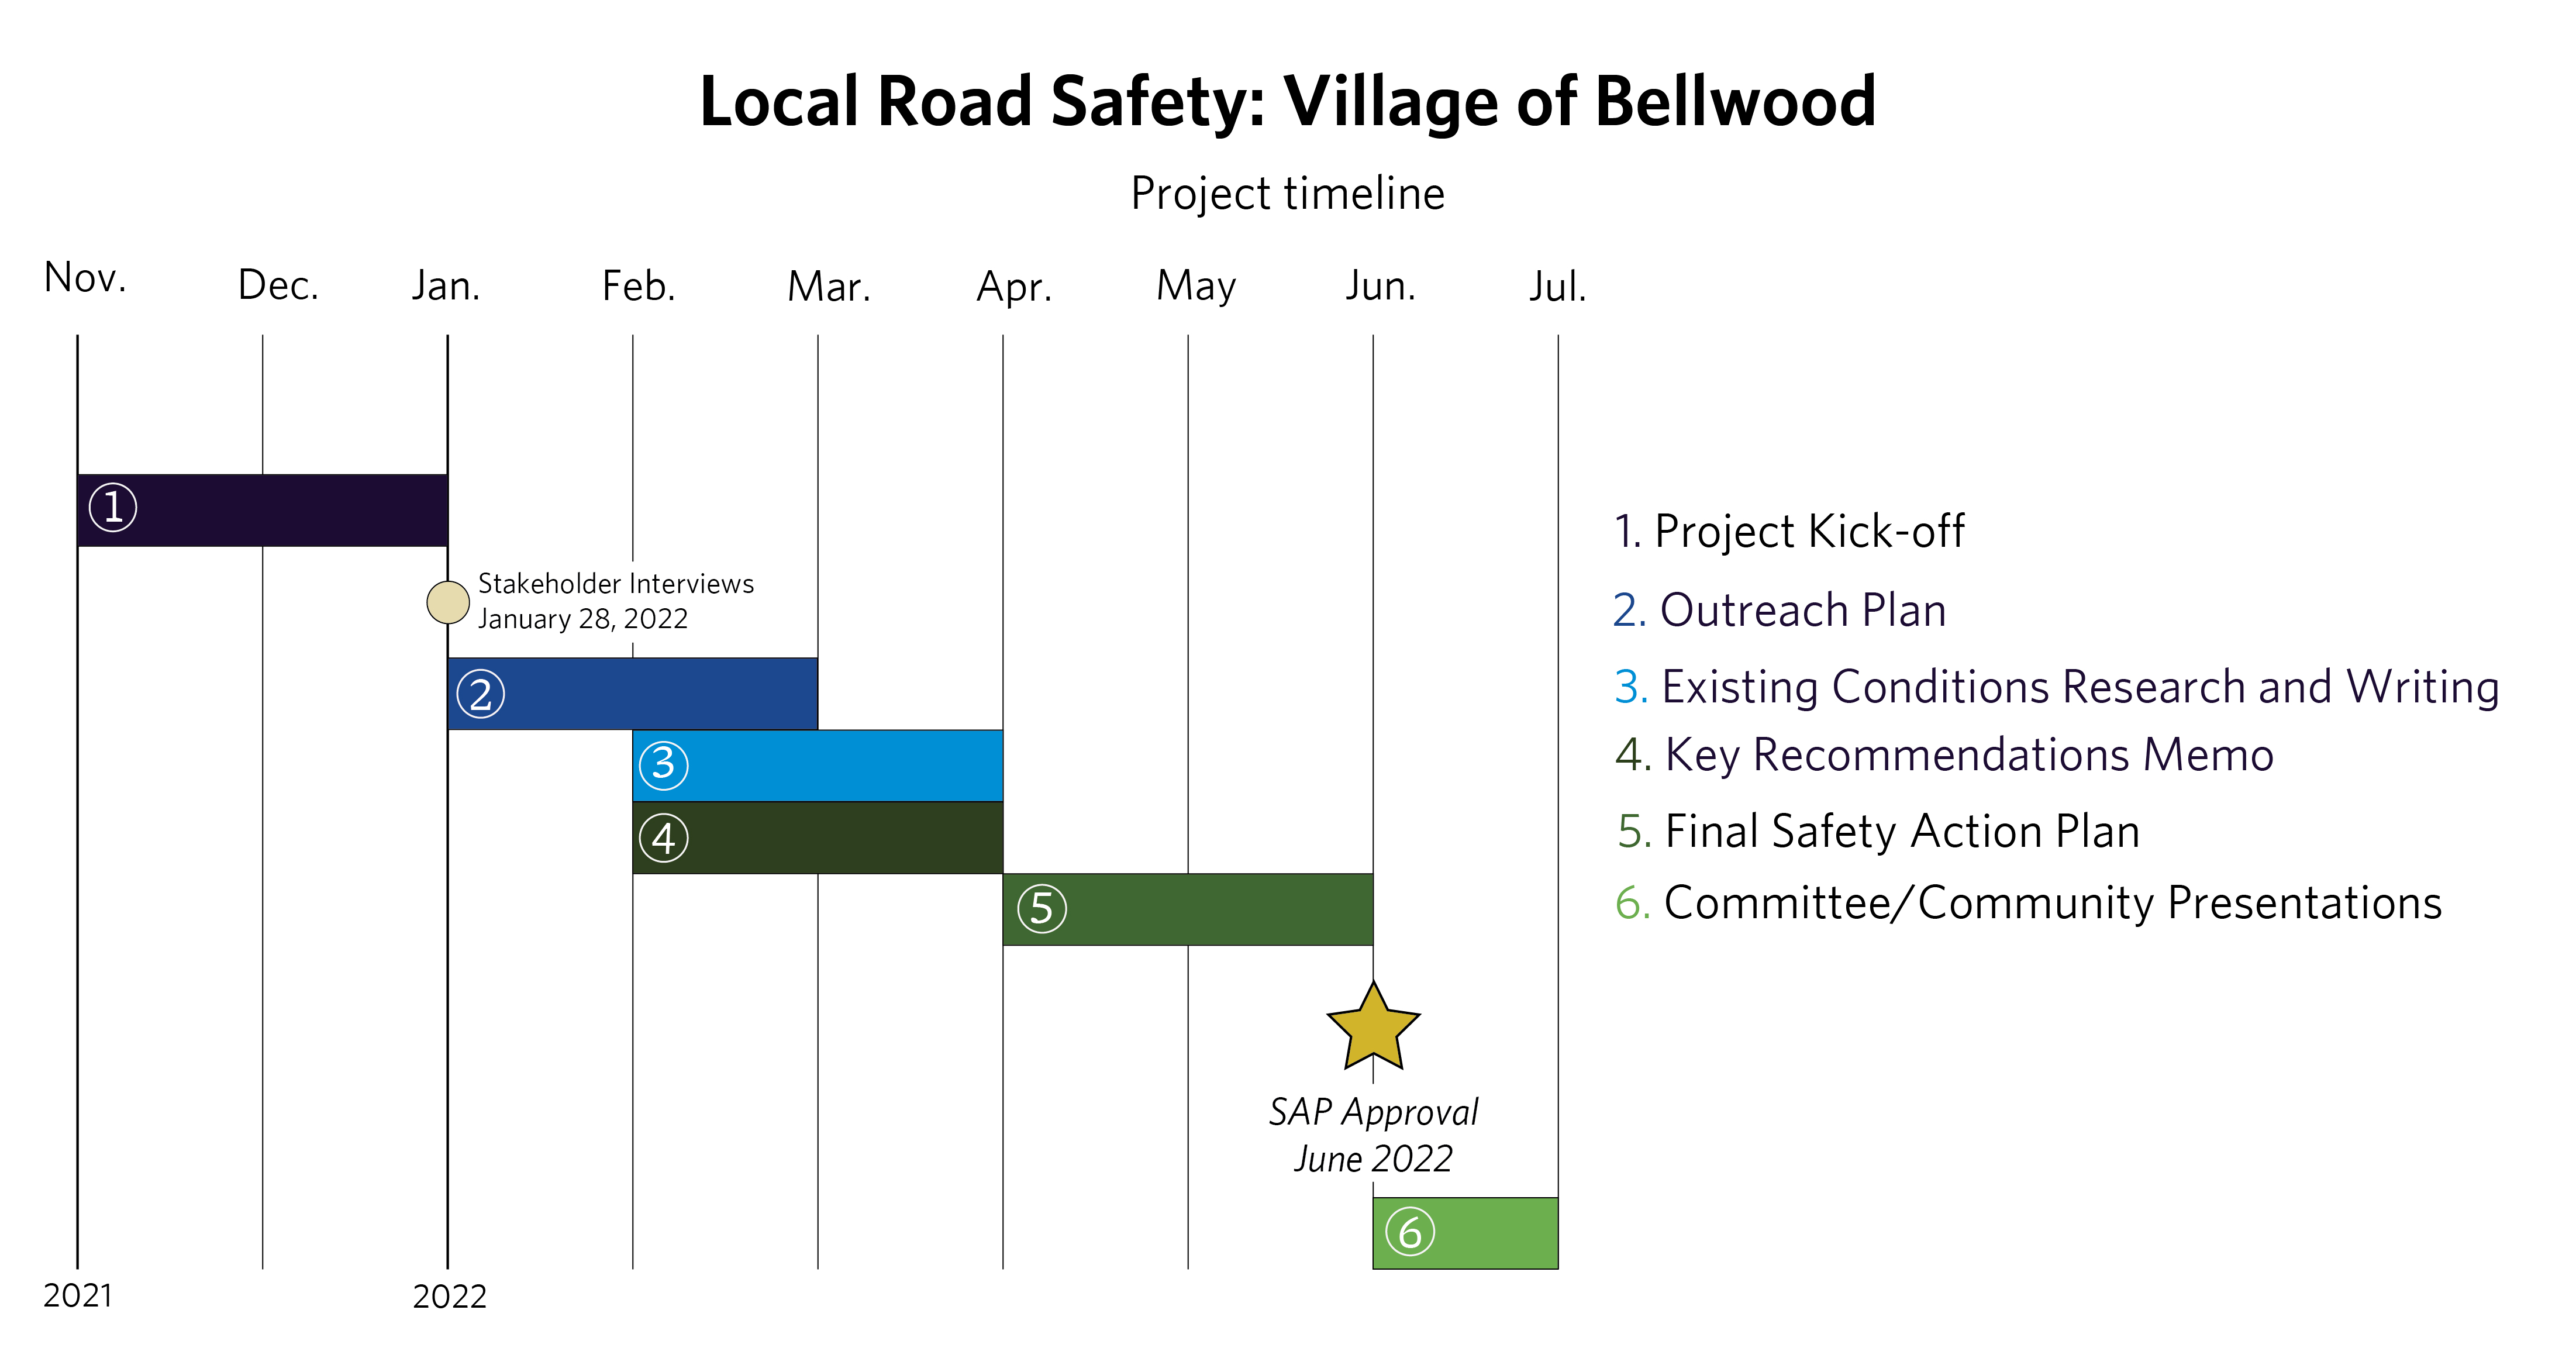 Local road safety: Bellwood. Project timeline. November-January: project kick-off. January-March: Outreach plan. January 28: Stakeholder interviews. February-April: Existing conditions research and writing. Key recommendations memo. April-June: Final safety action plan. June: SAP approval. June-July: Committee/community presentation